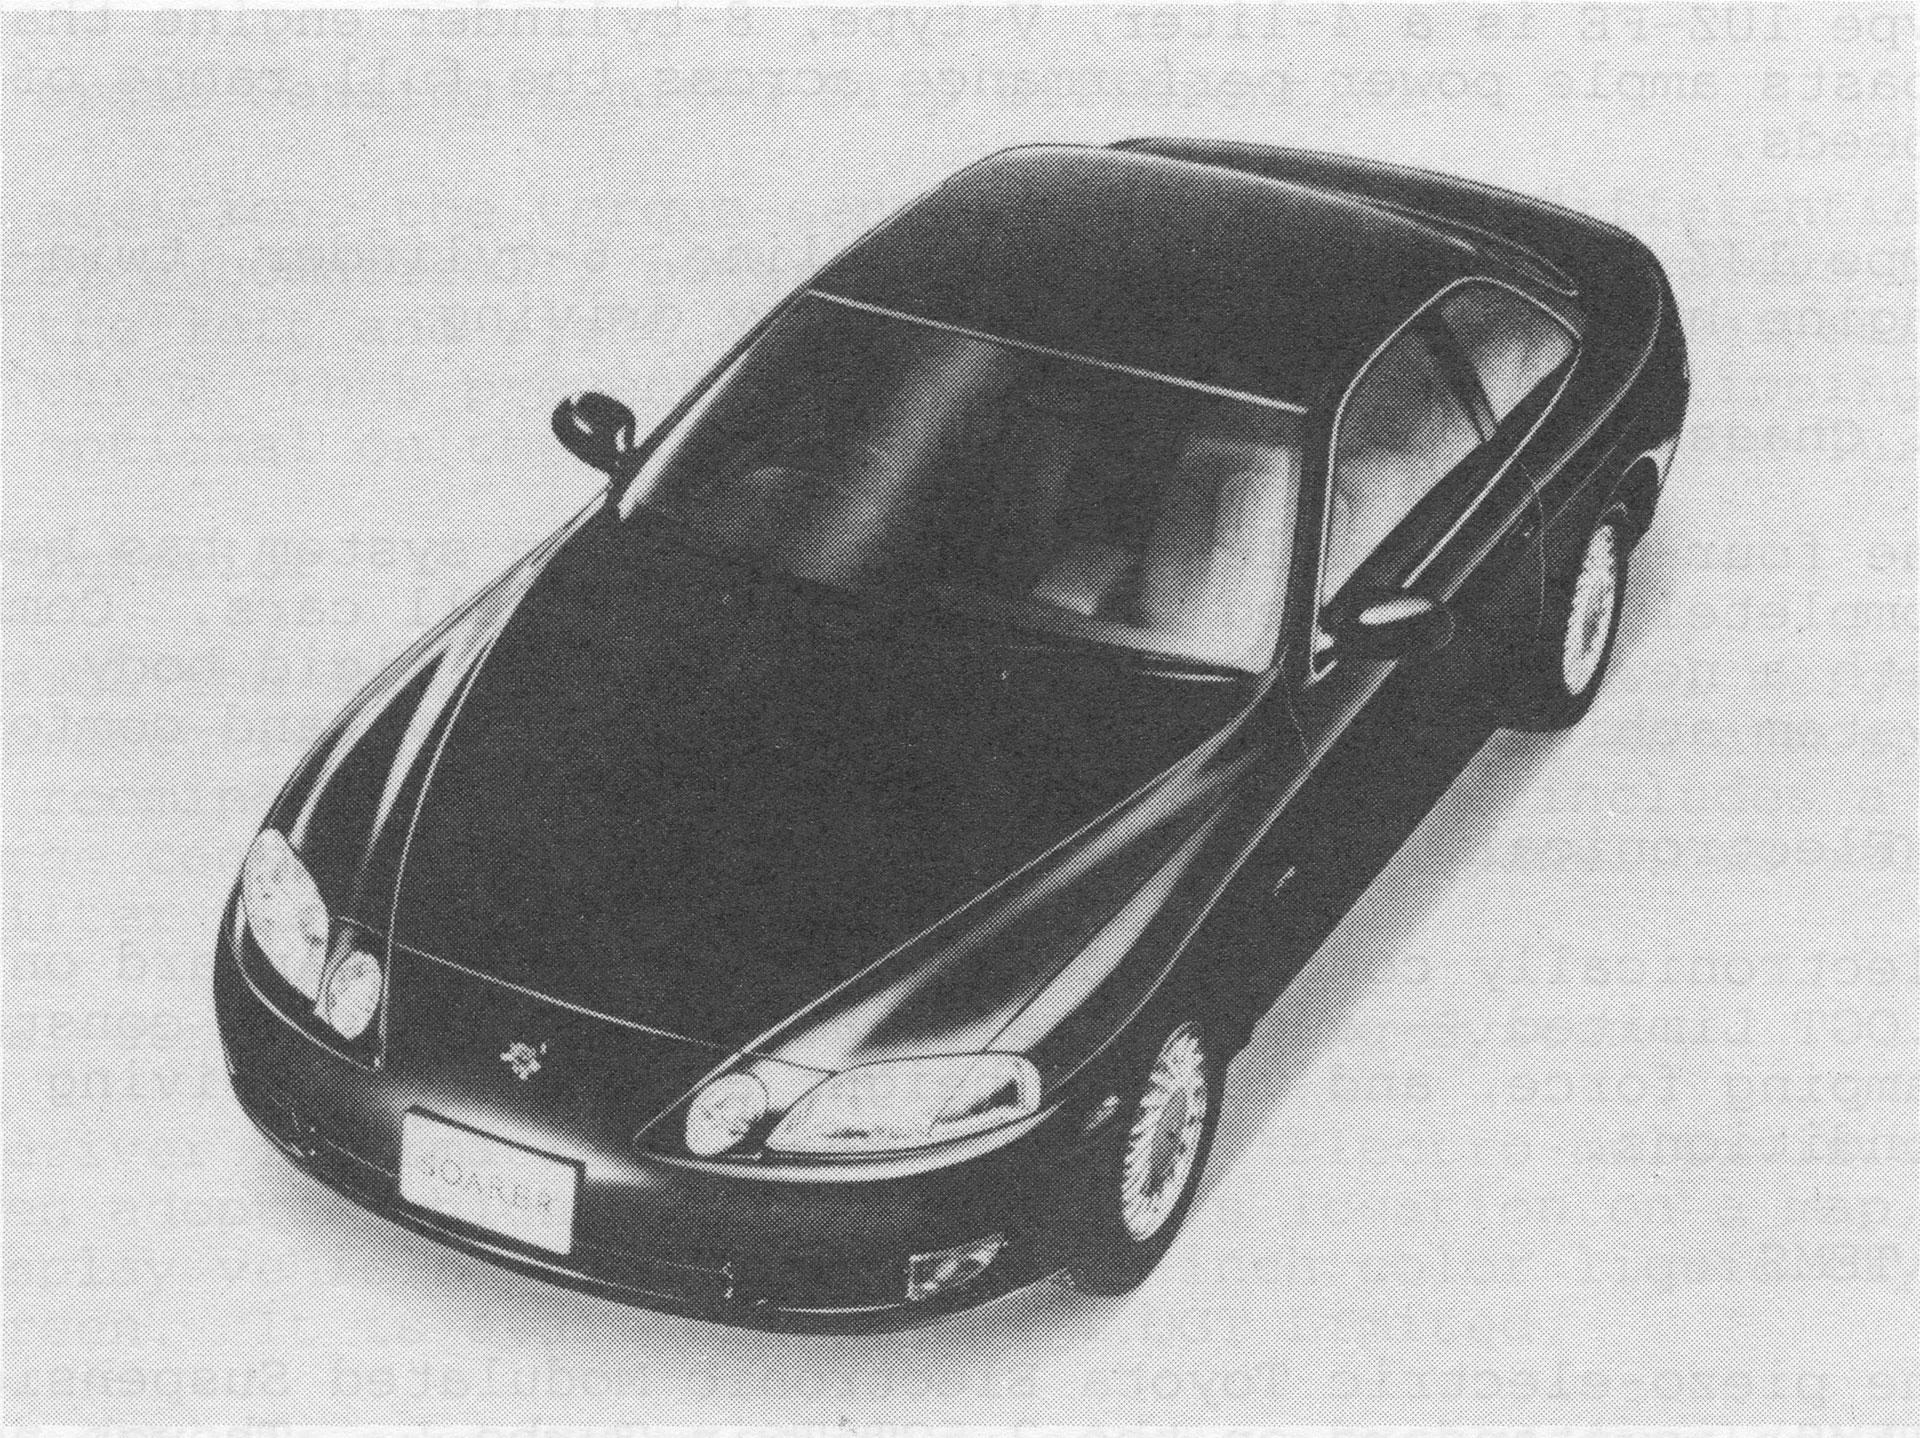 A black and white photo of a Toyota Soarer from an arial view.